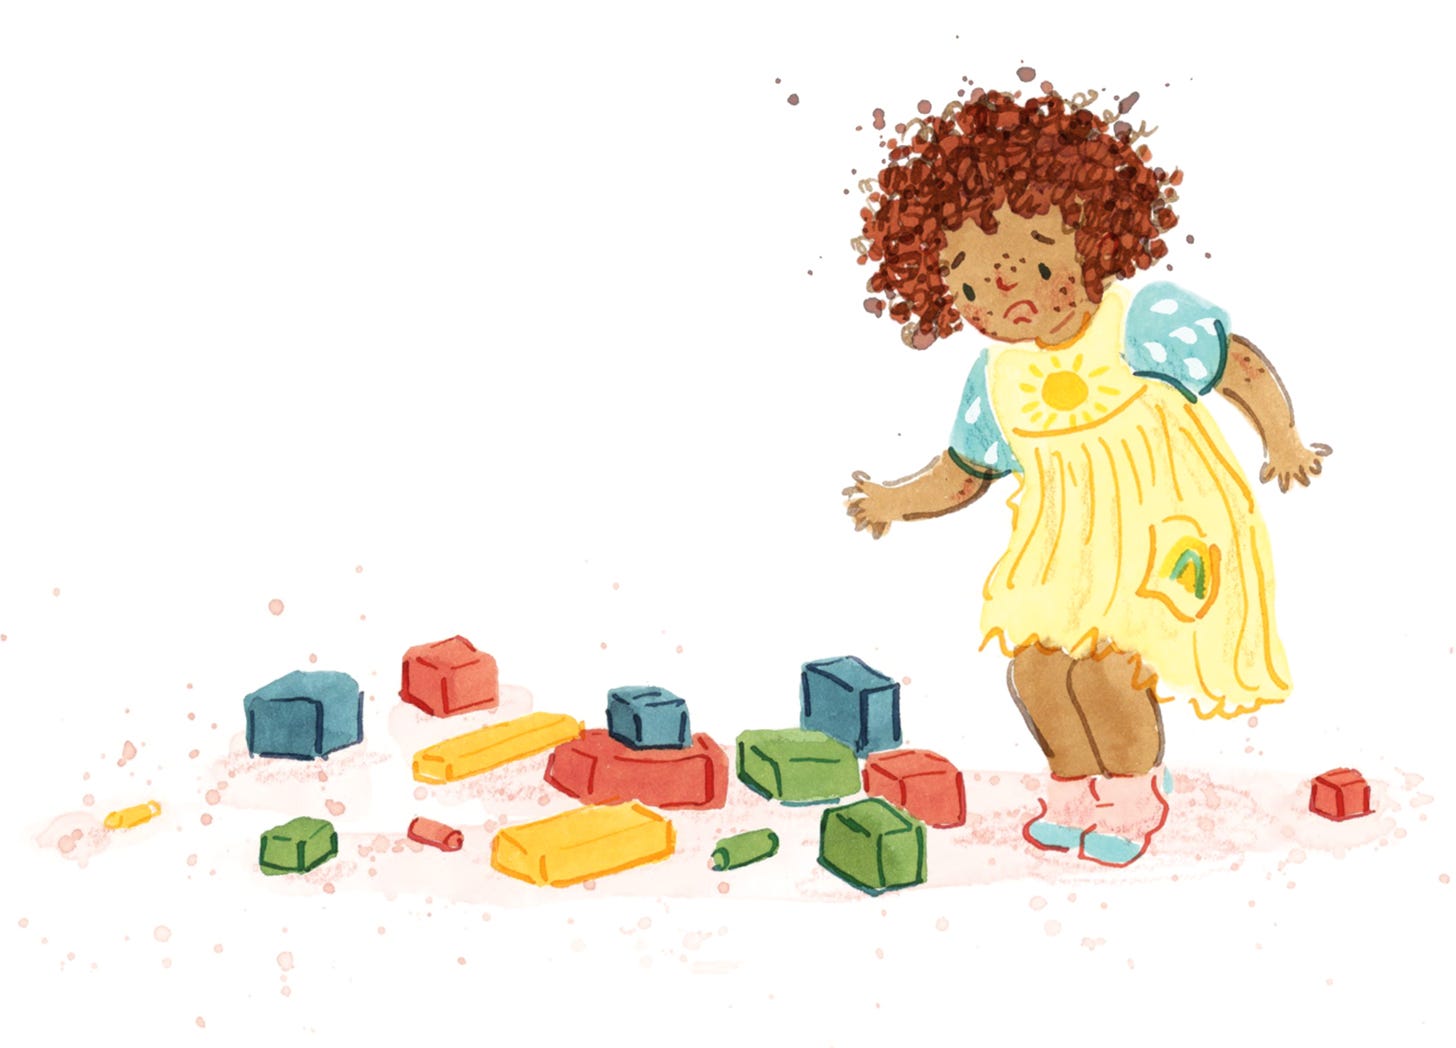 Upset toddler standing next to collapsed tower of blocks. Illustration by Nanette Regan from It's Your Time to Shine by Dianne White